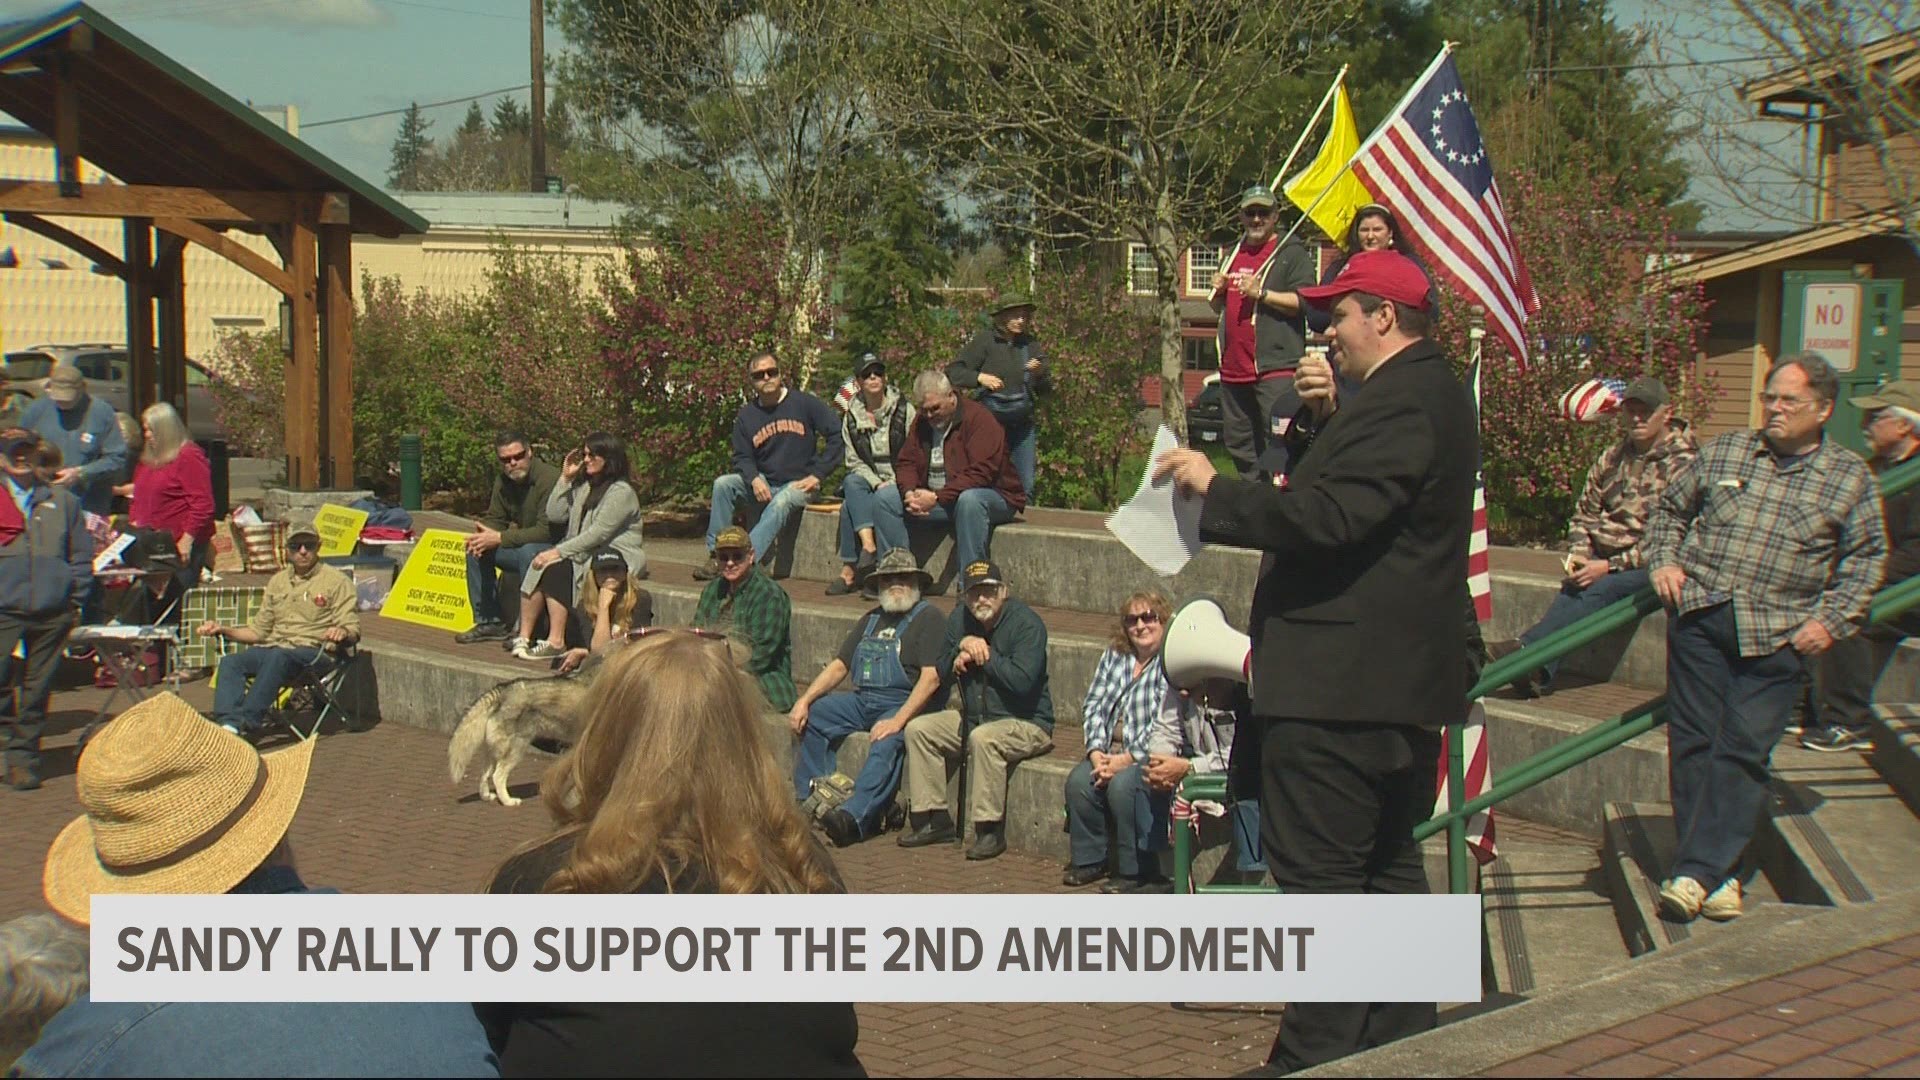 Sandy rally to support the Second Amendment